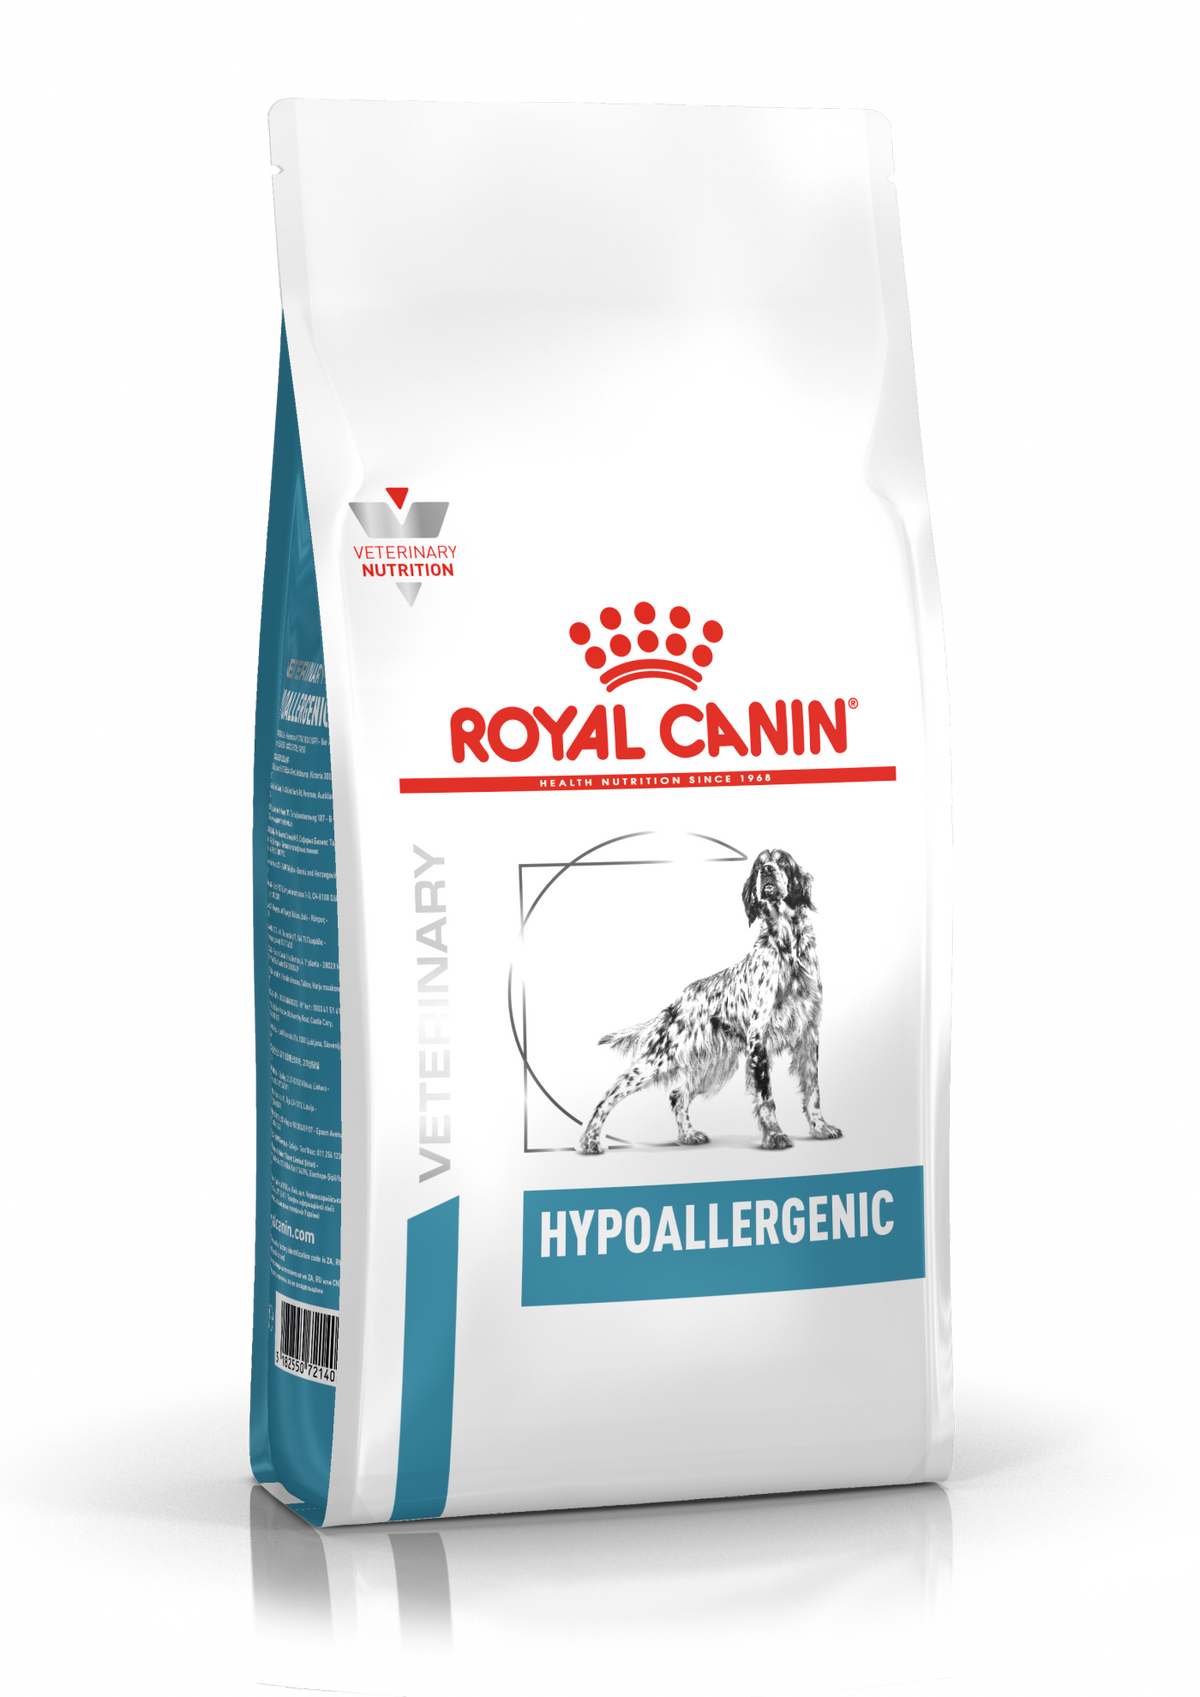 Royal Canin Hypoallergenic for Dogs Vet Central